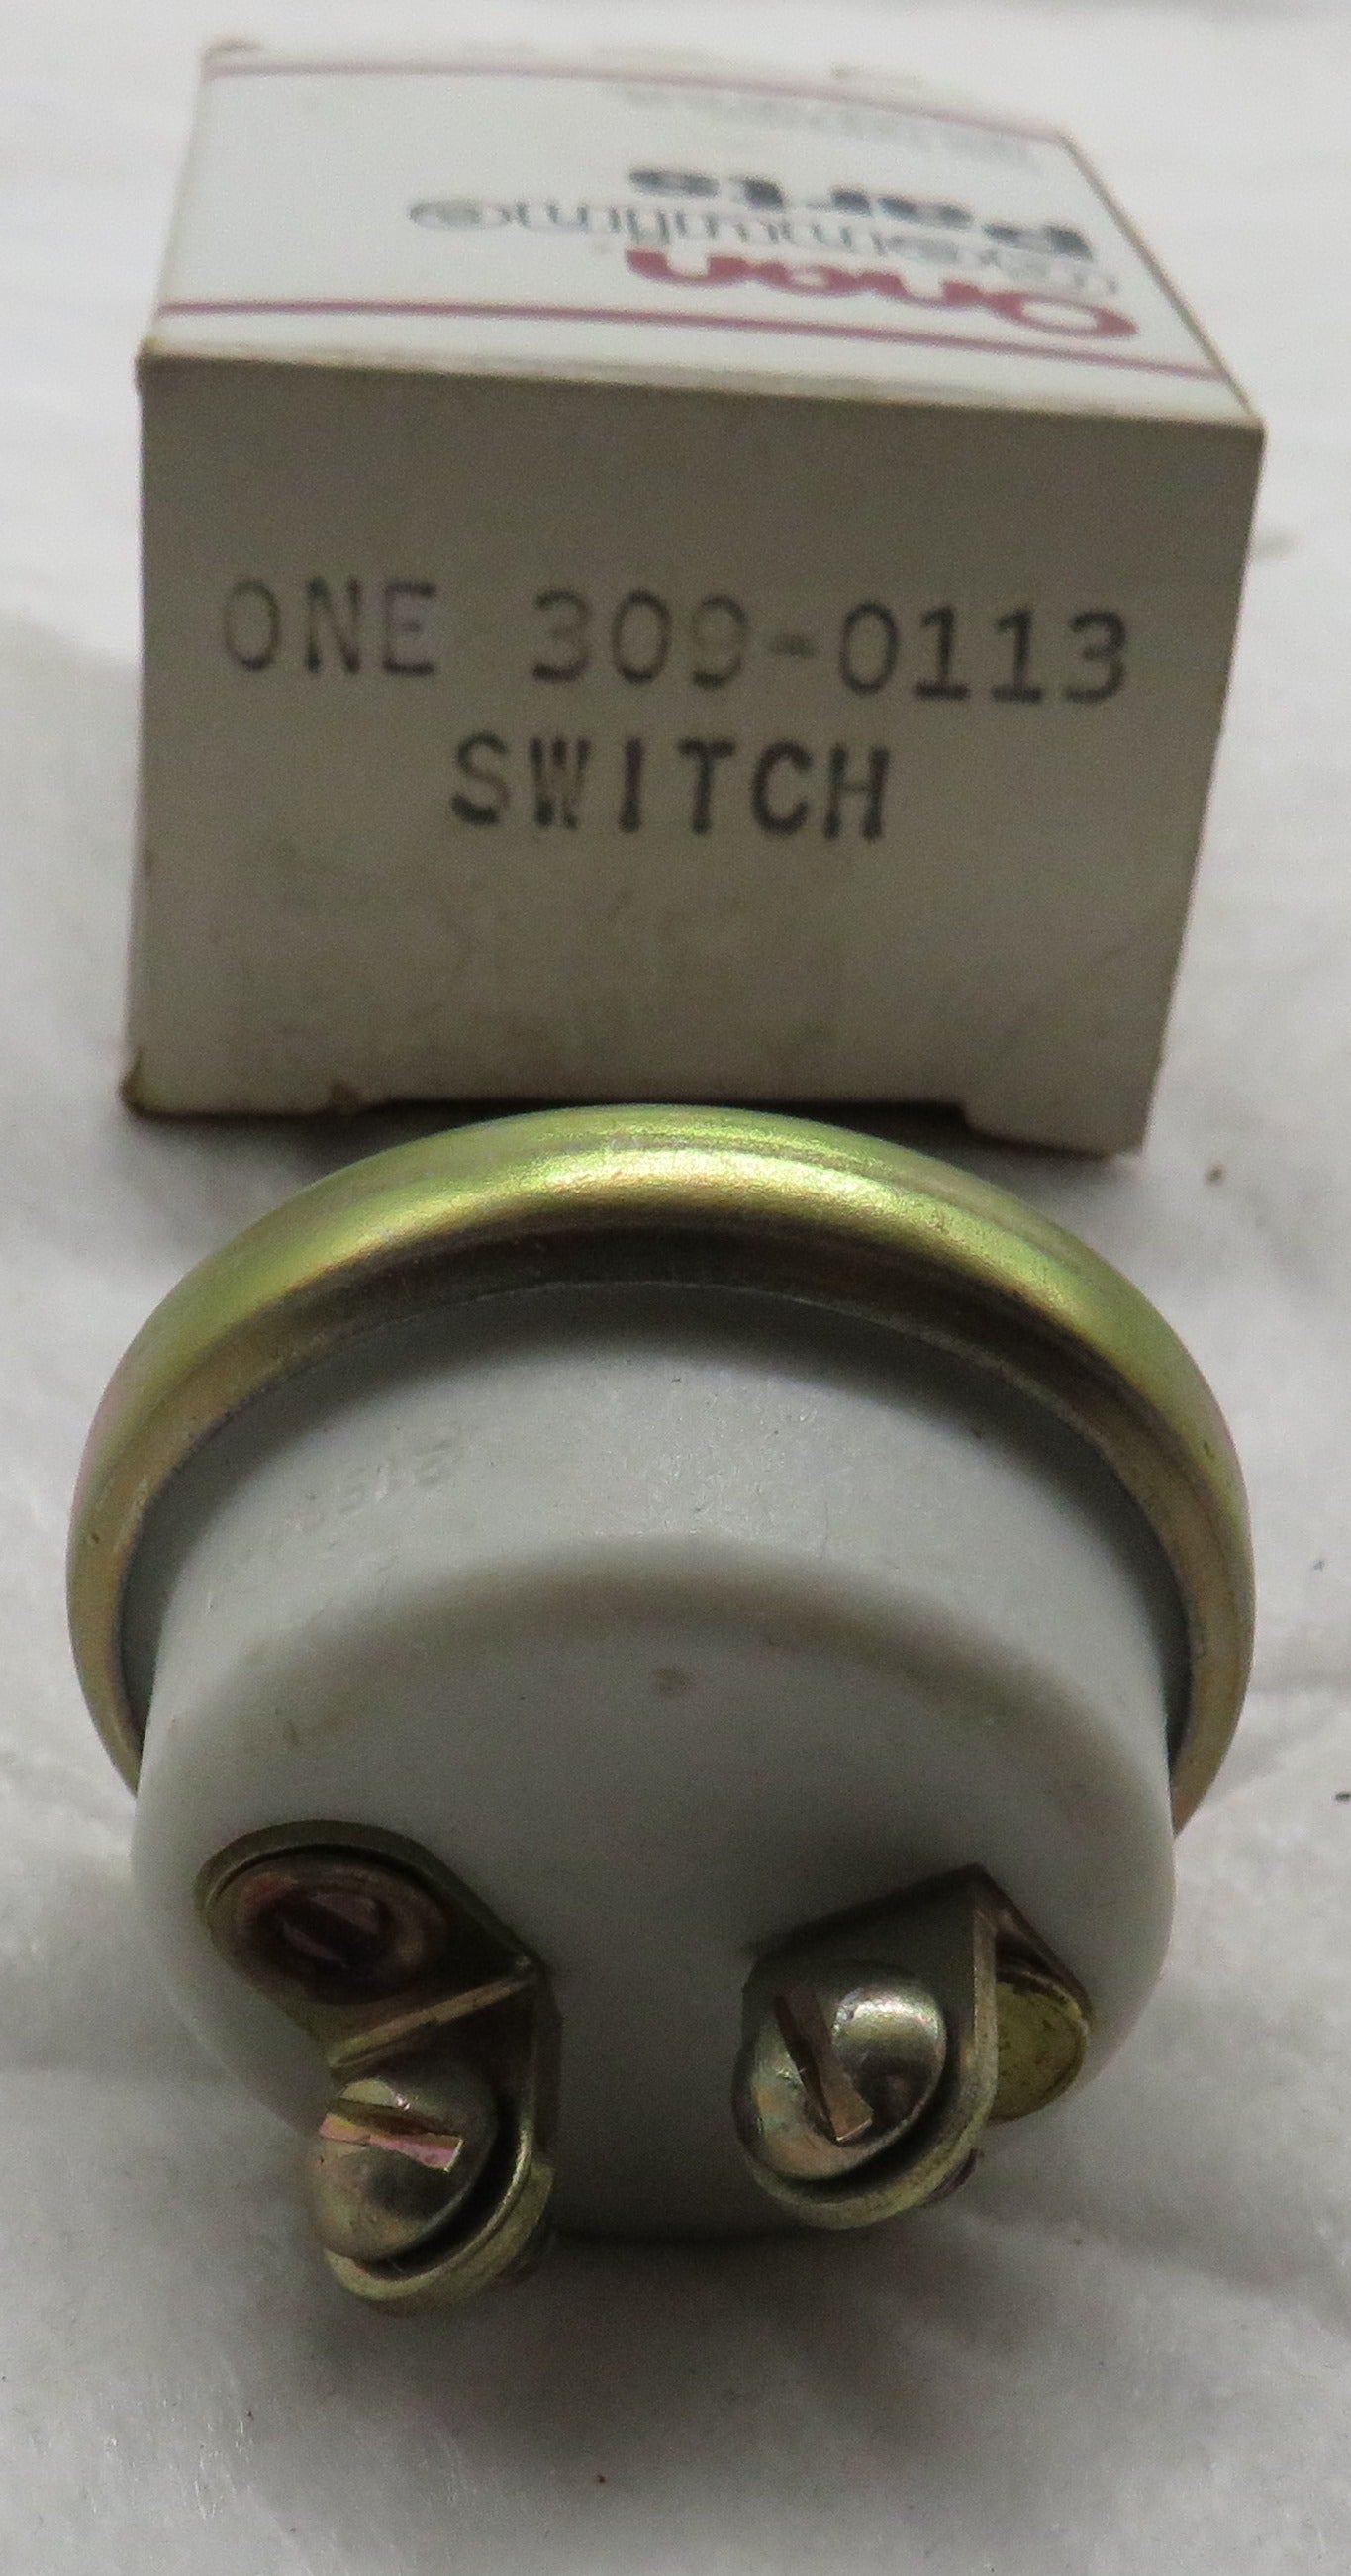 309-0113 Onan Replaced by 309-0641-04 Low Oil Pressure Switch MCCK (Spec H J) 